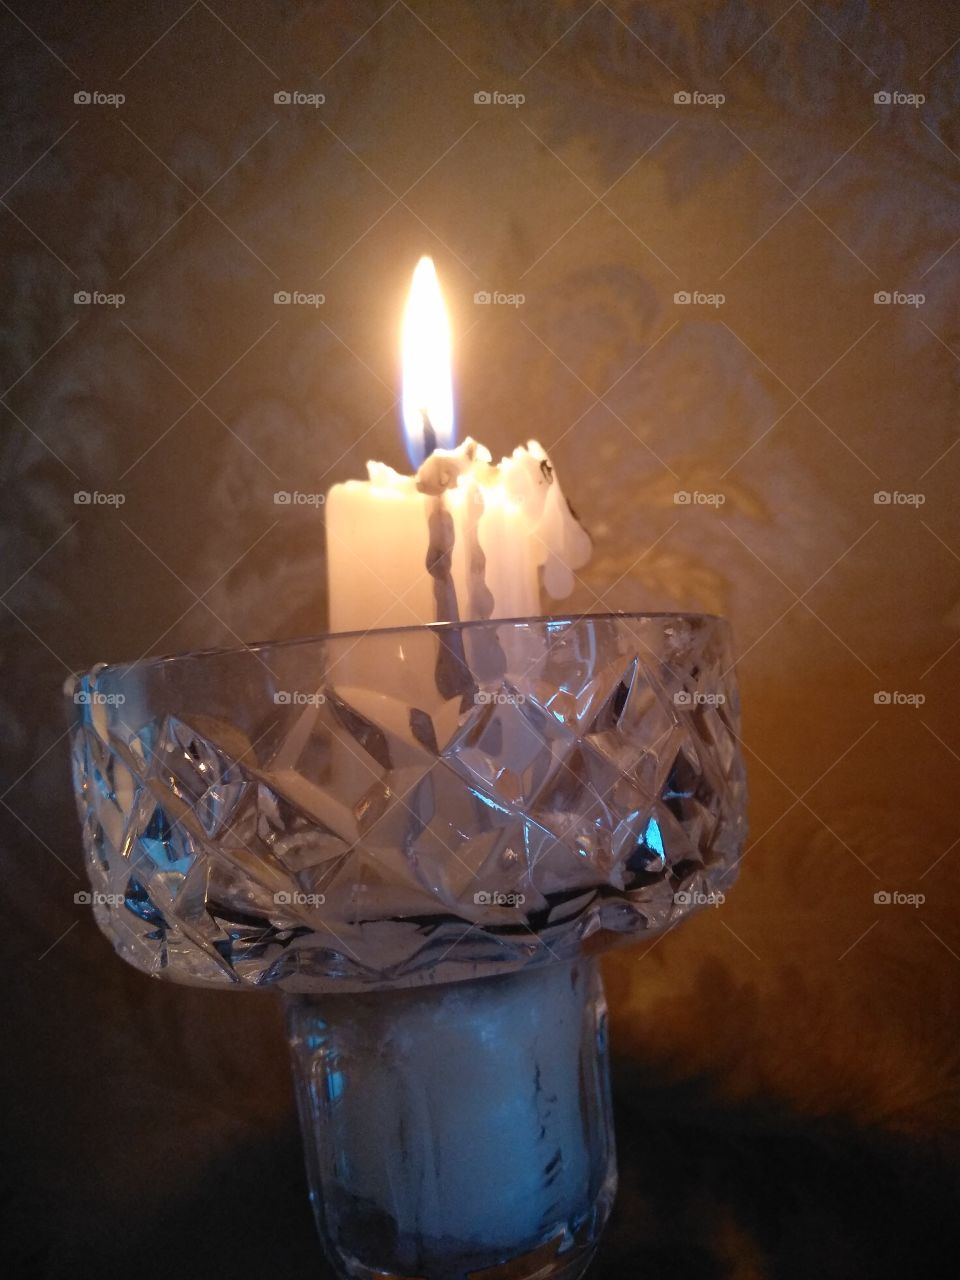 a lit candle dripping wax in a glass holder